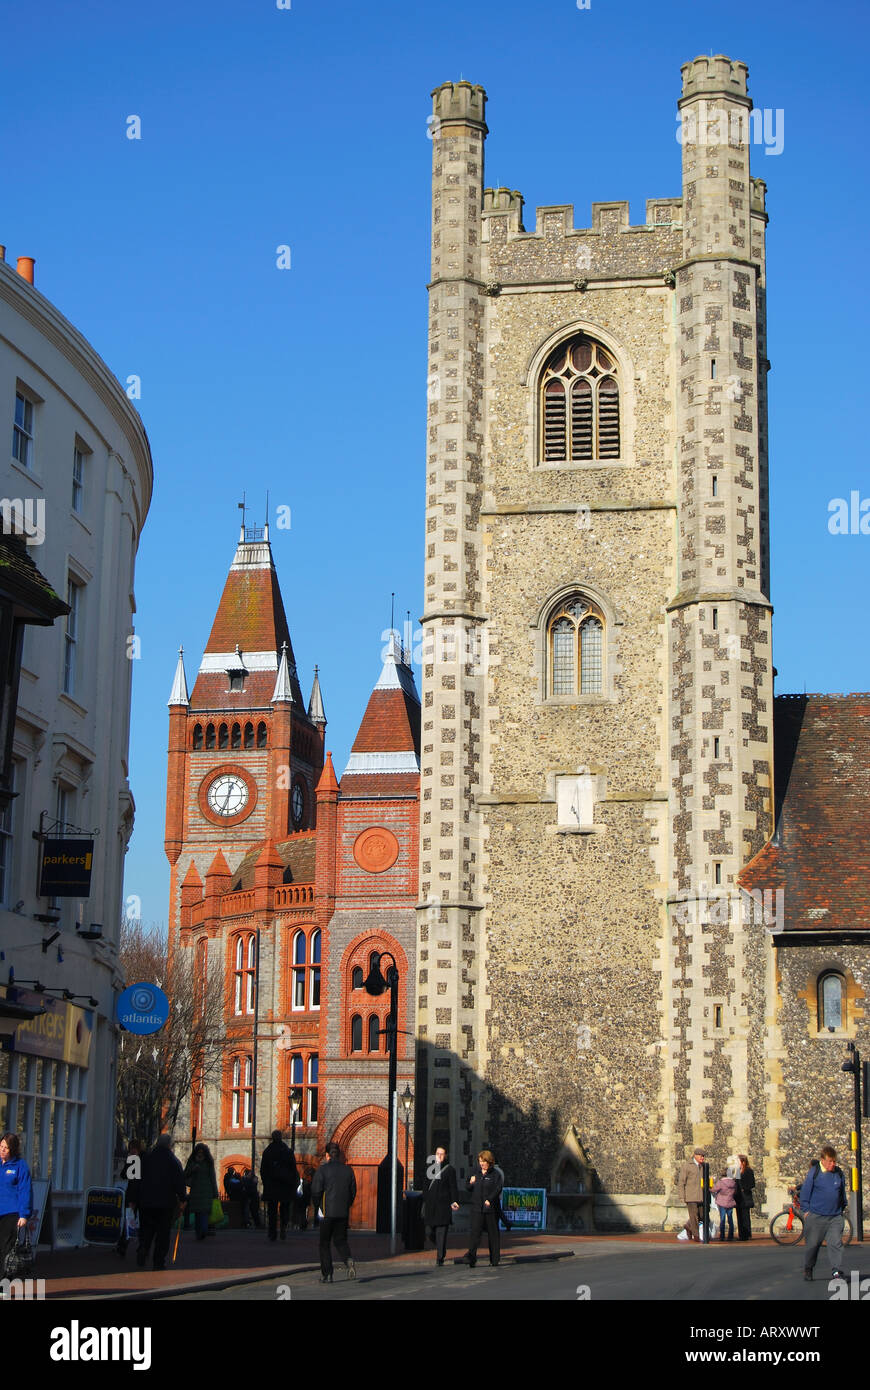 St Lawrence's Church Tower and Town Hall, The Butter Market, Reading, Berkshire, England. United Kingdom Stock Photo